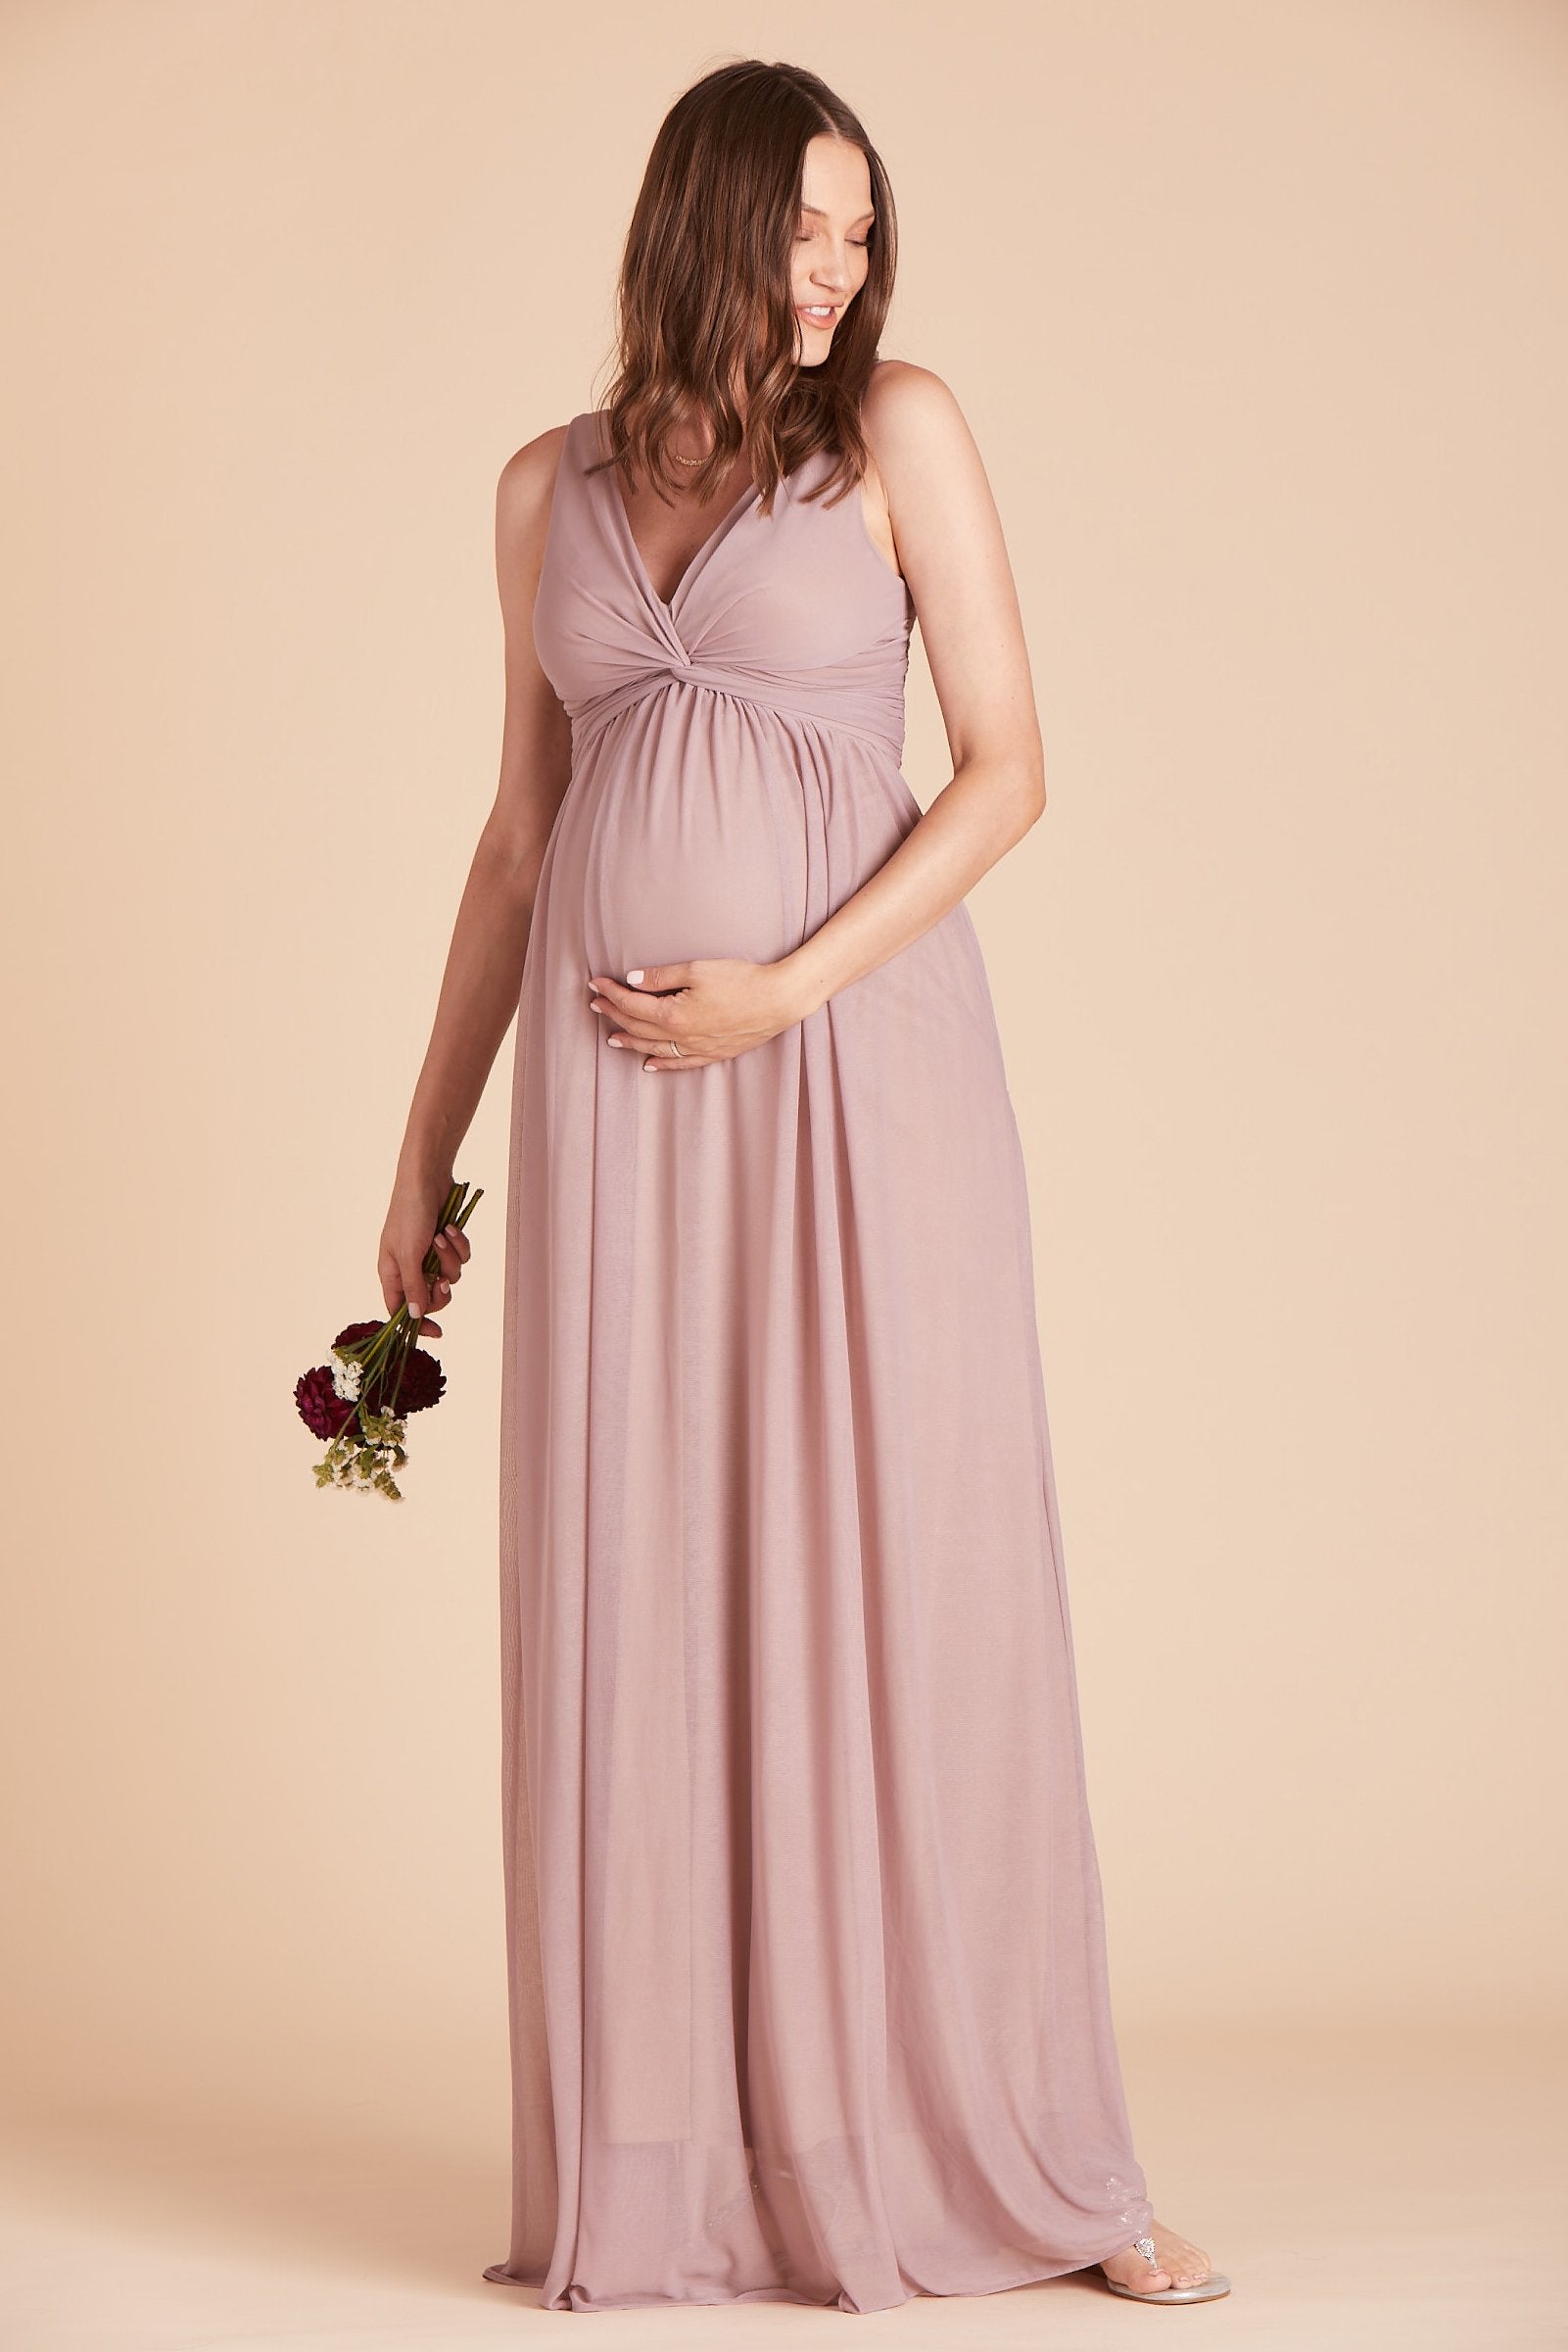 Lianna bridesmaid dress in mauve pink chiffon by Birdy Grey, front view